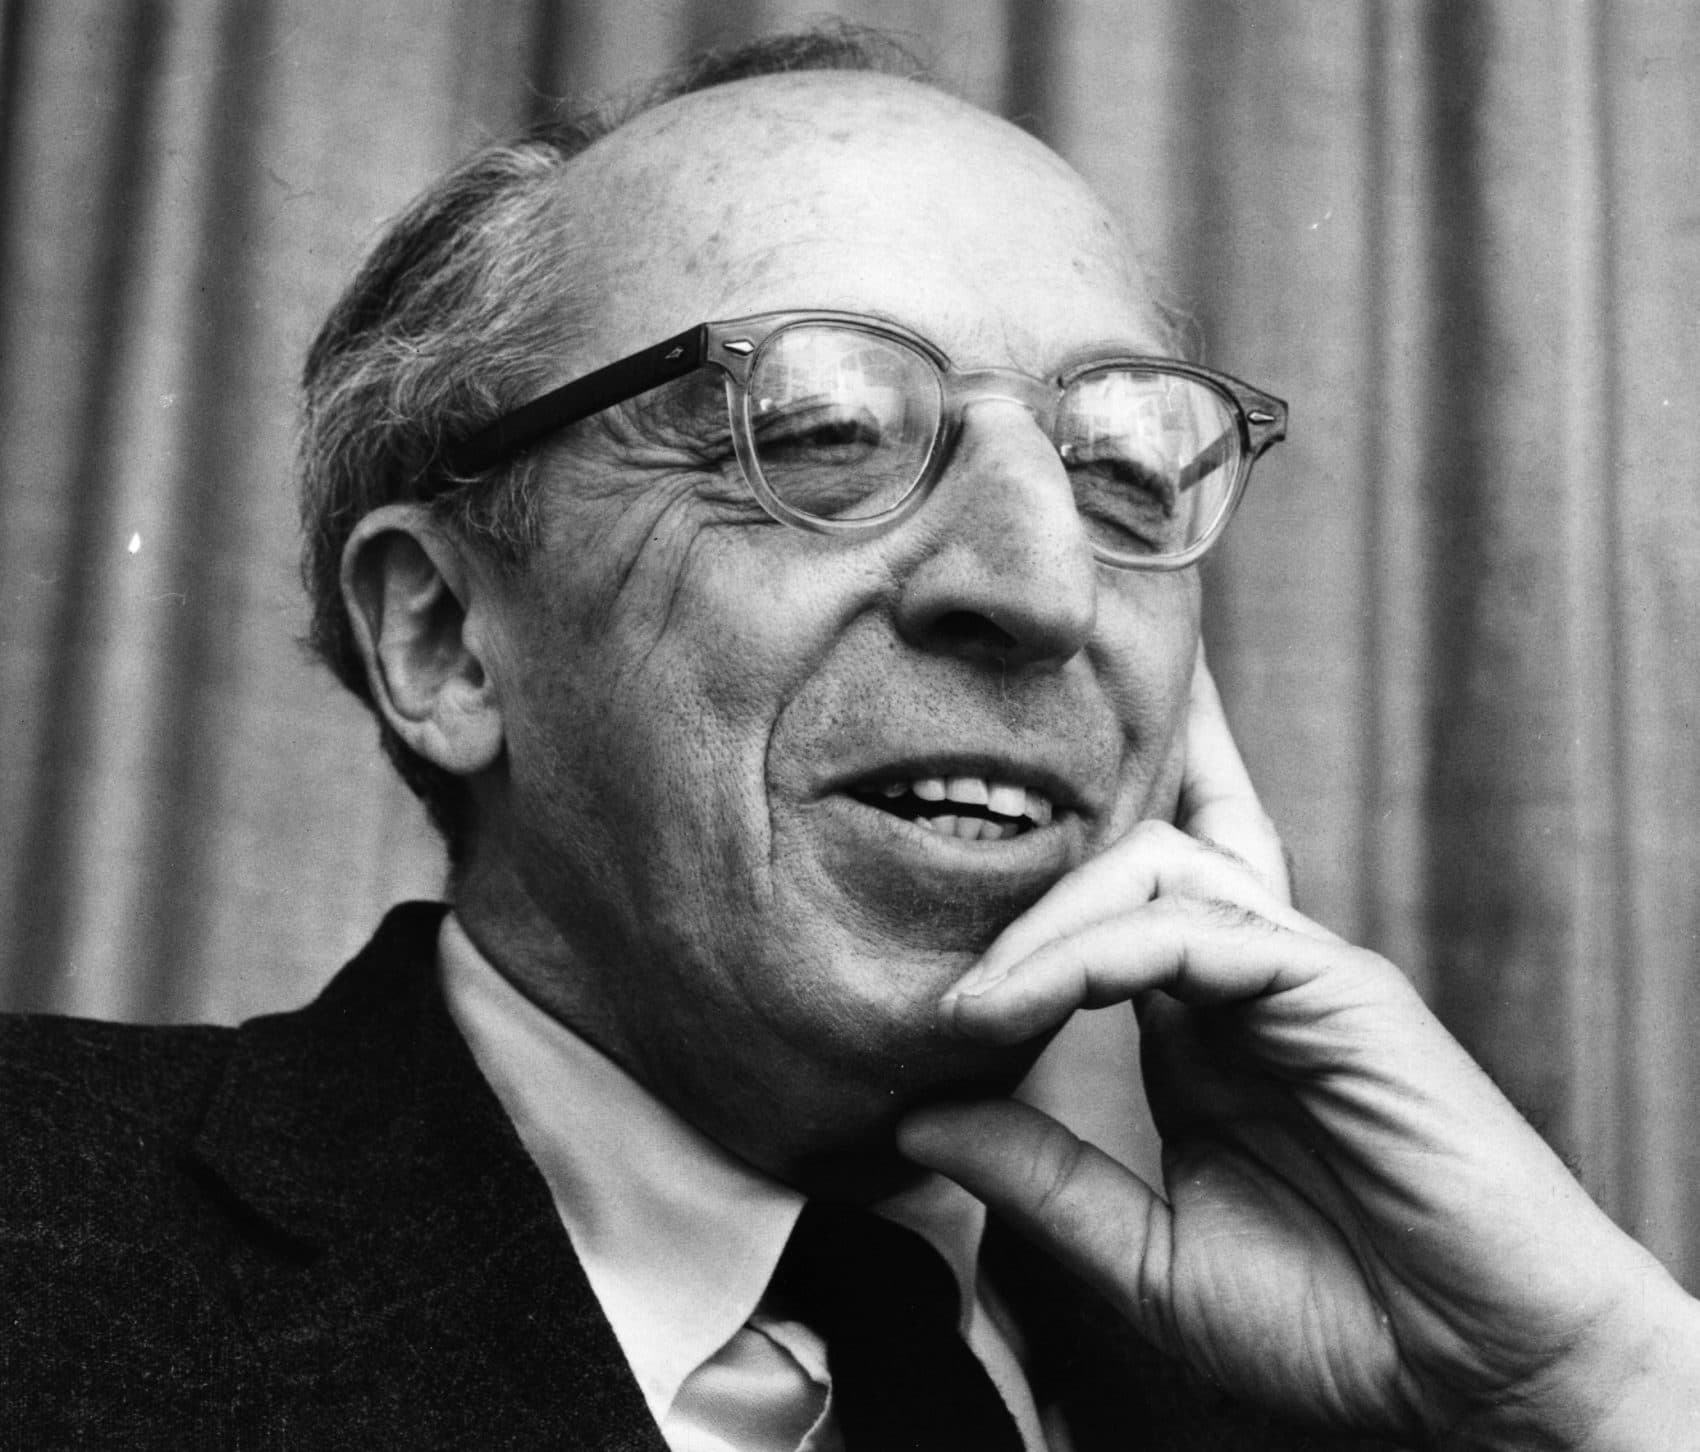 What to Listen for in Music by Aaron Copland